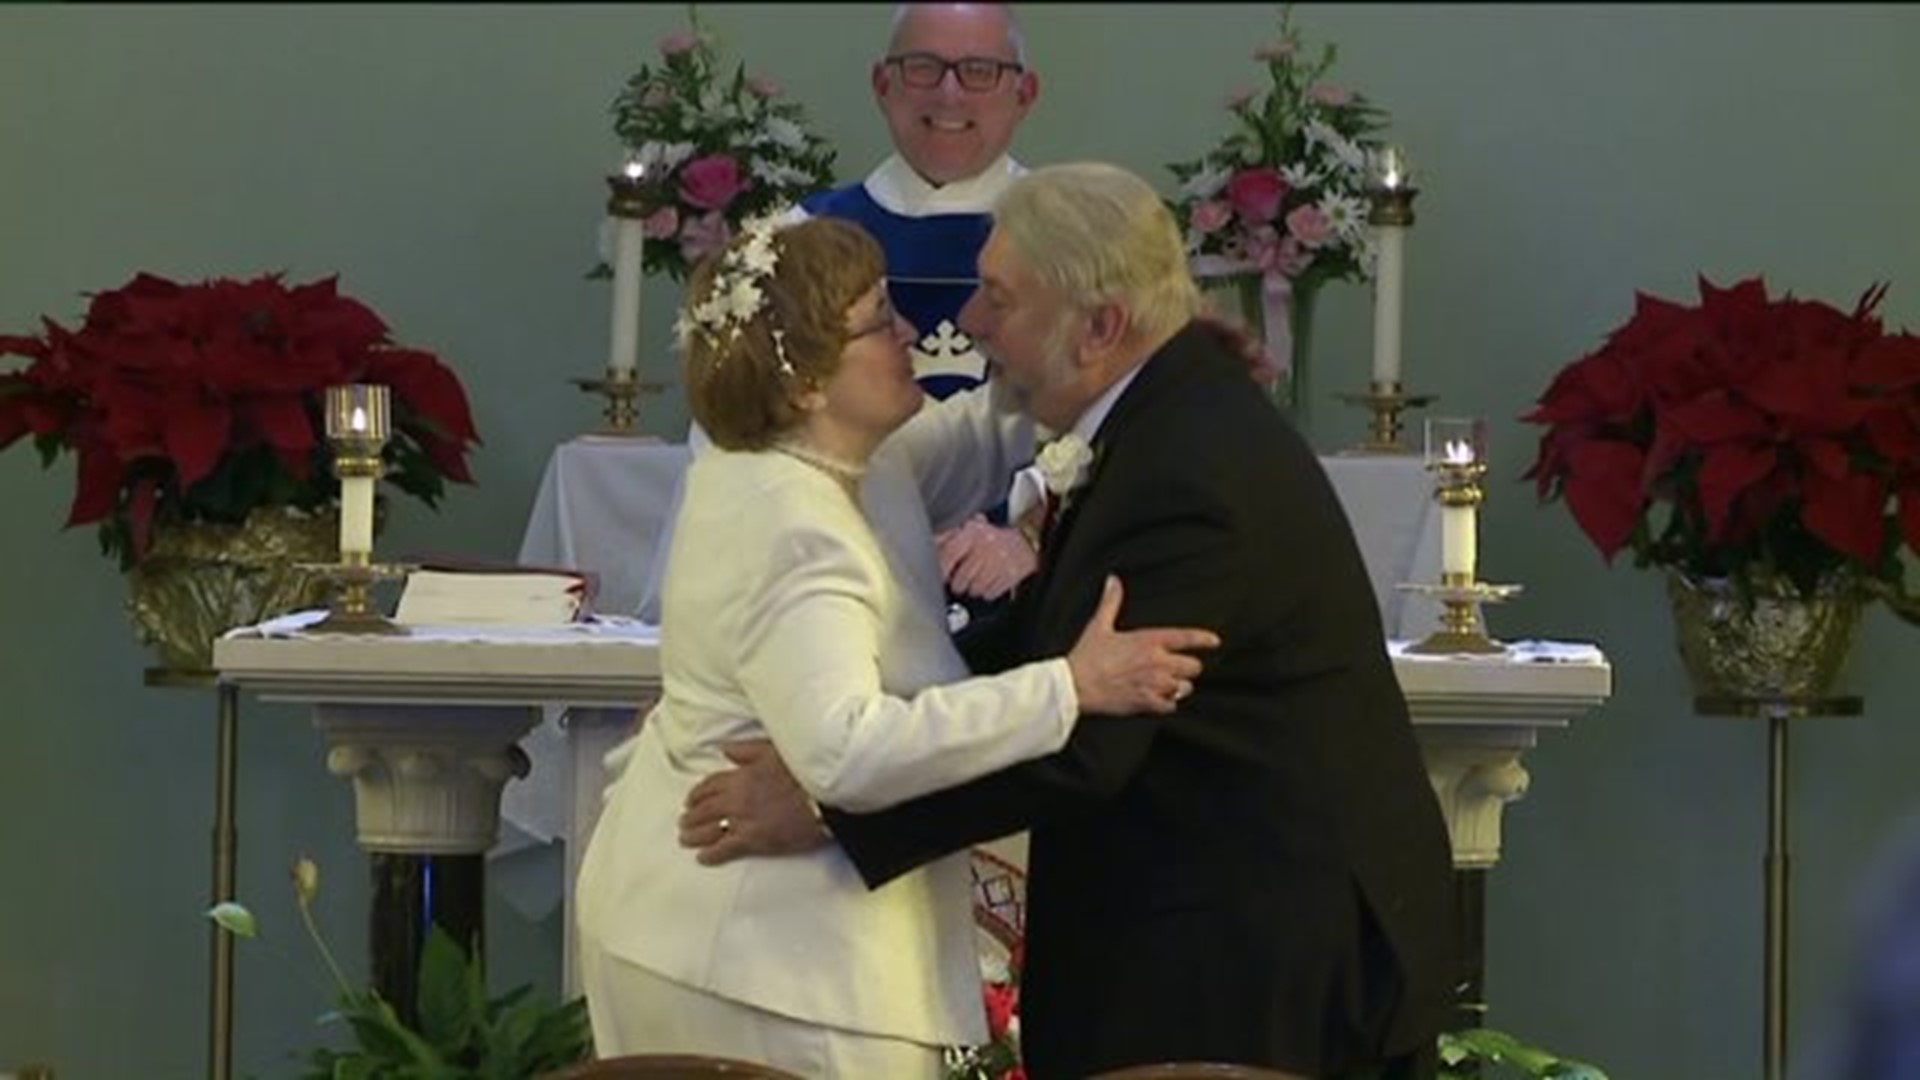 High School Sweethearts Tie the Knot, 50 Years After Break-up